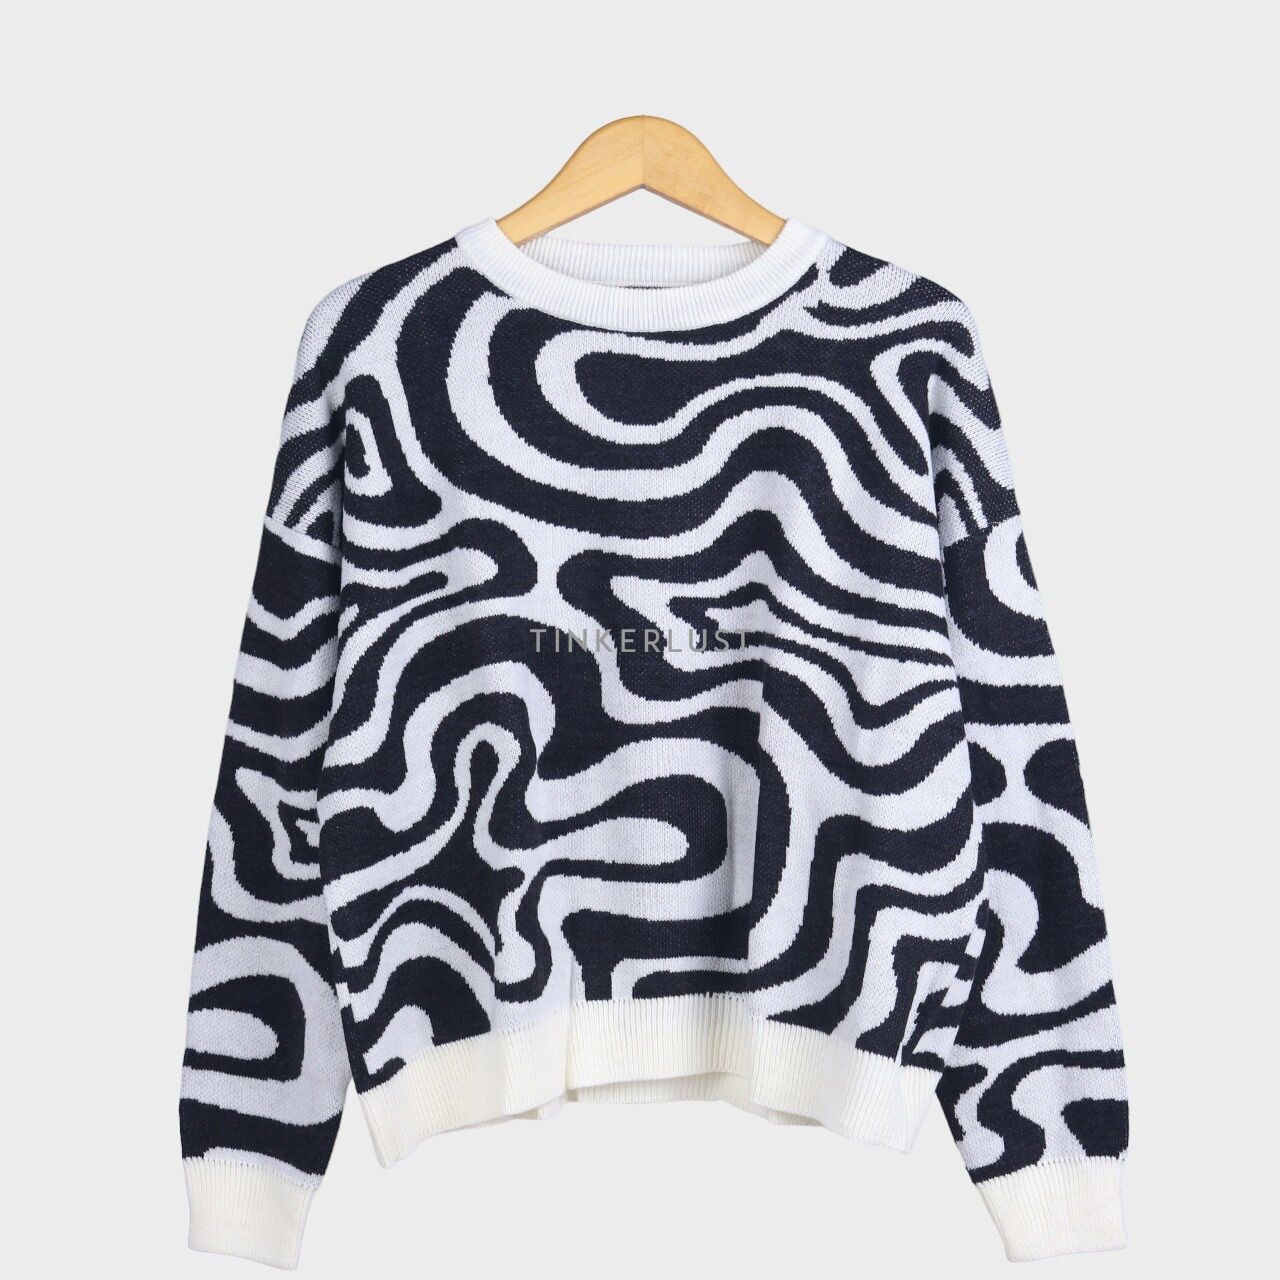 Play With Pattero Gravity Map Knit Black Sweater